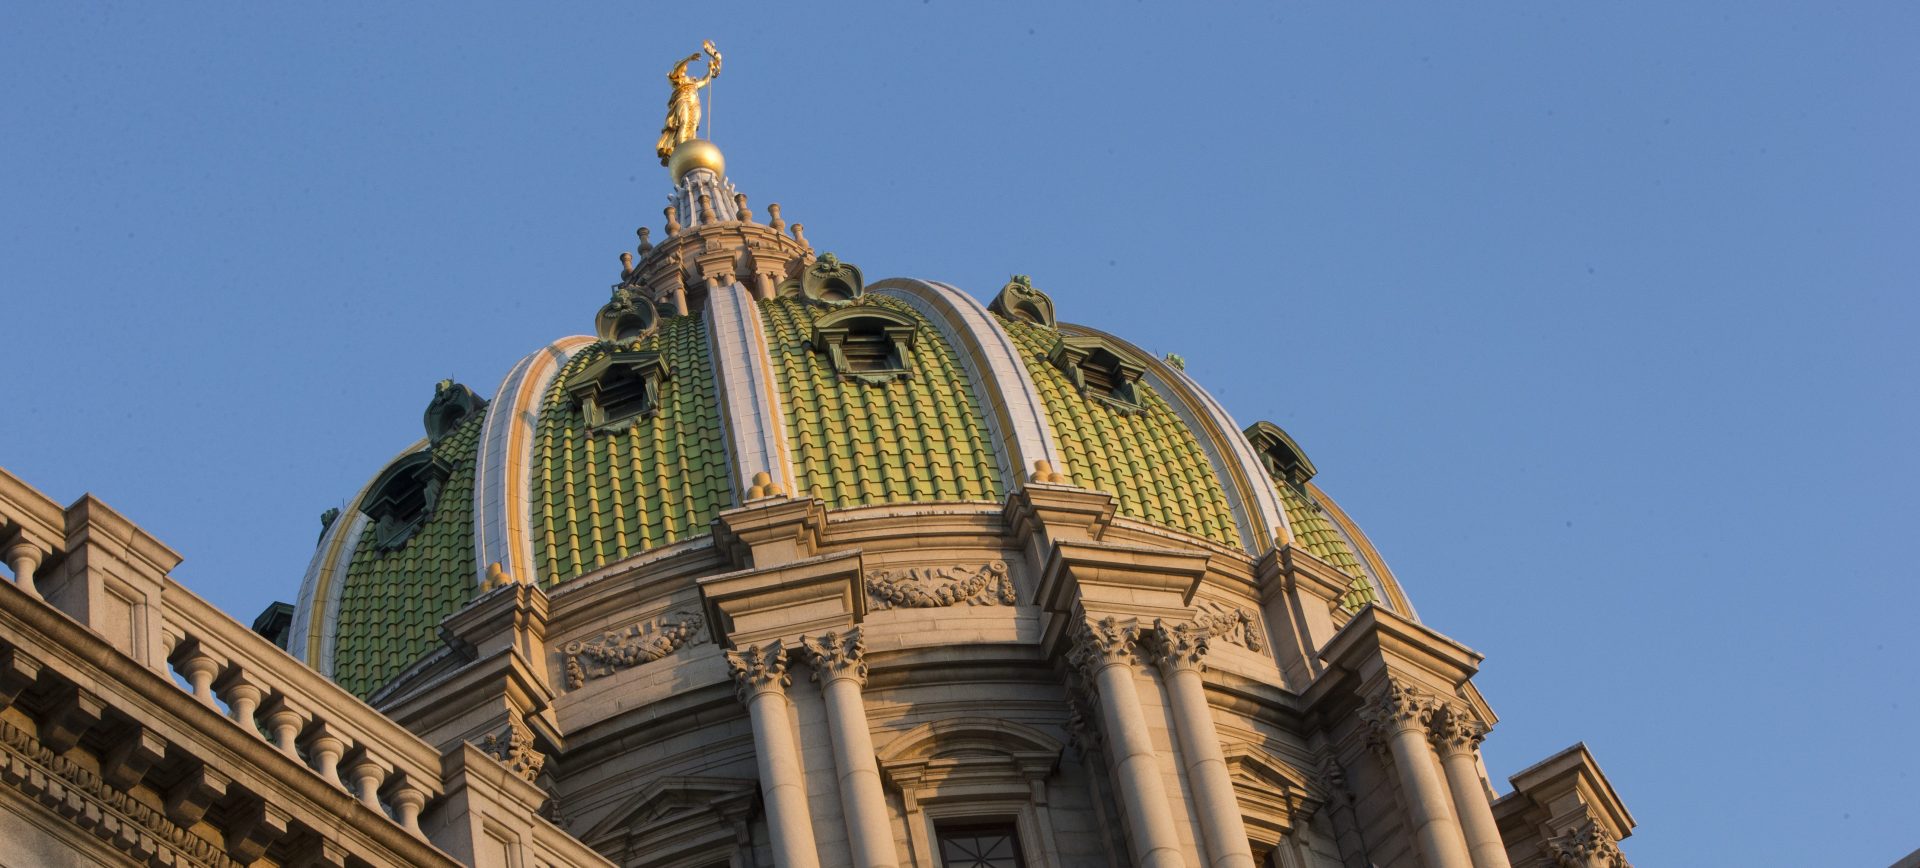 In a House committee meeting, the subject of how Pennsylvania manages its regulations was front and center.